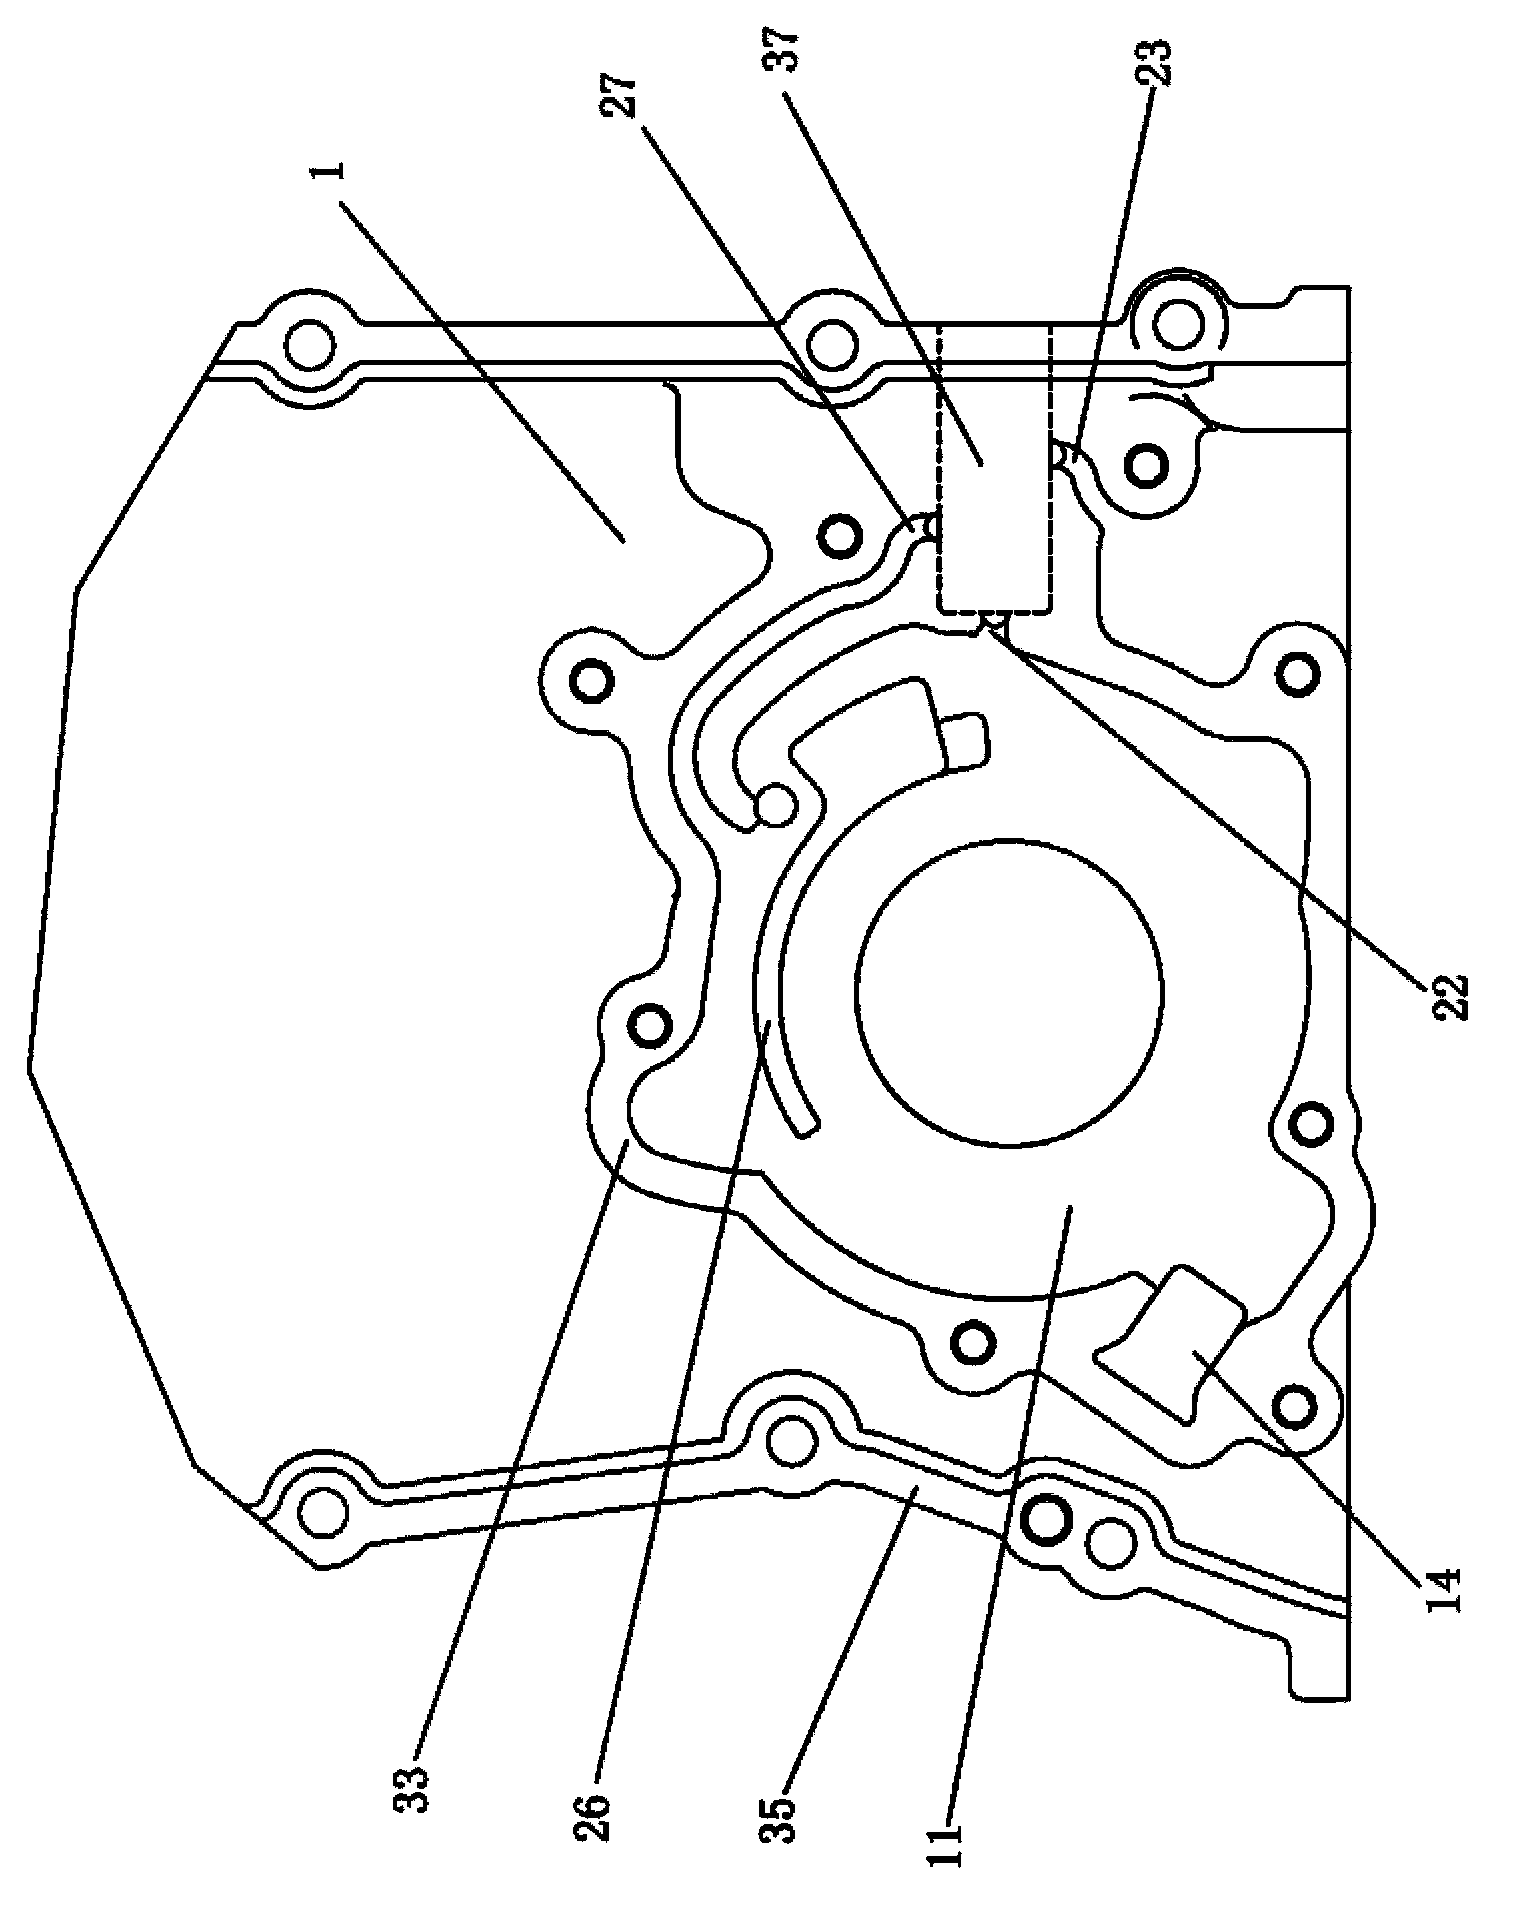 Oil pump with variable displacement